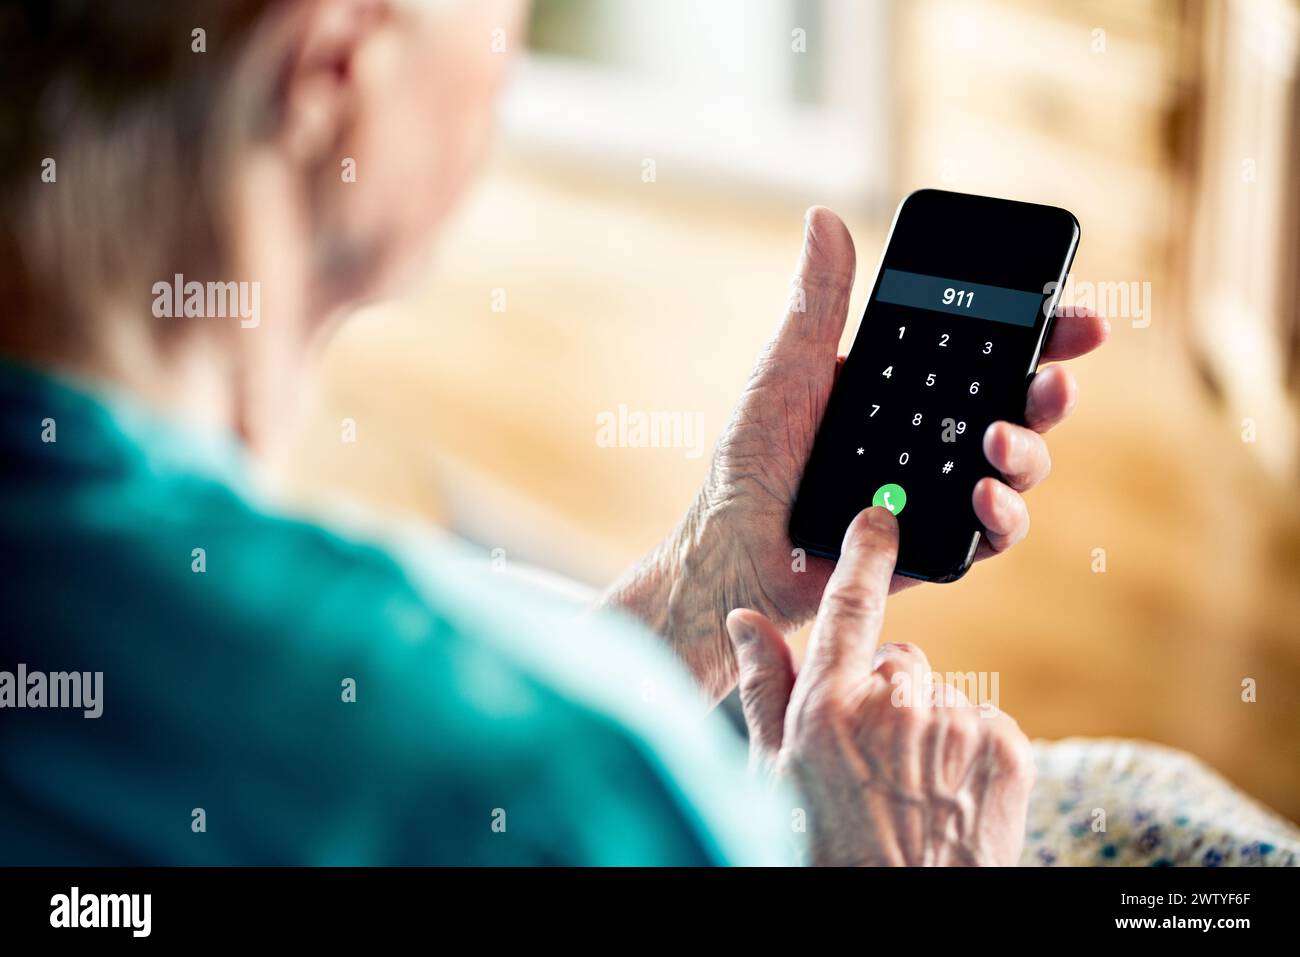 Phone call to emergency number 911. Old senior woman. Heart attack, medical injury or fire. Police hotline. Hospital assistance, paramedic or doctor. Stock Photo